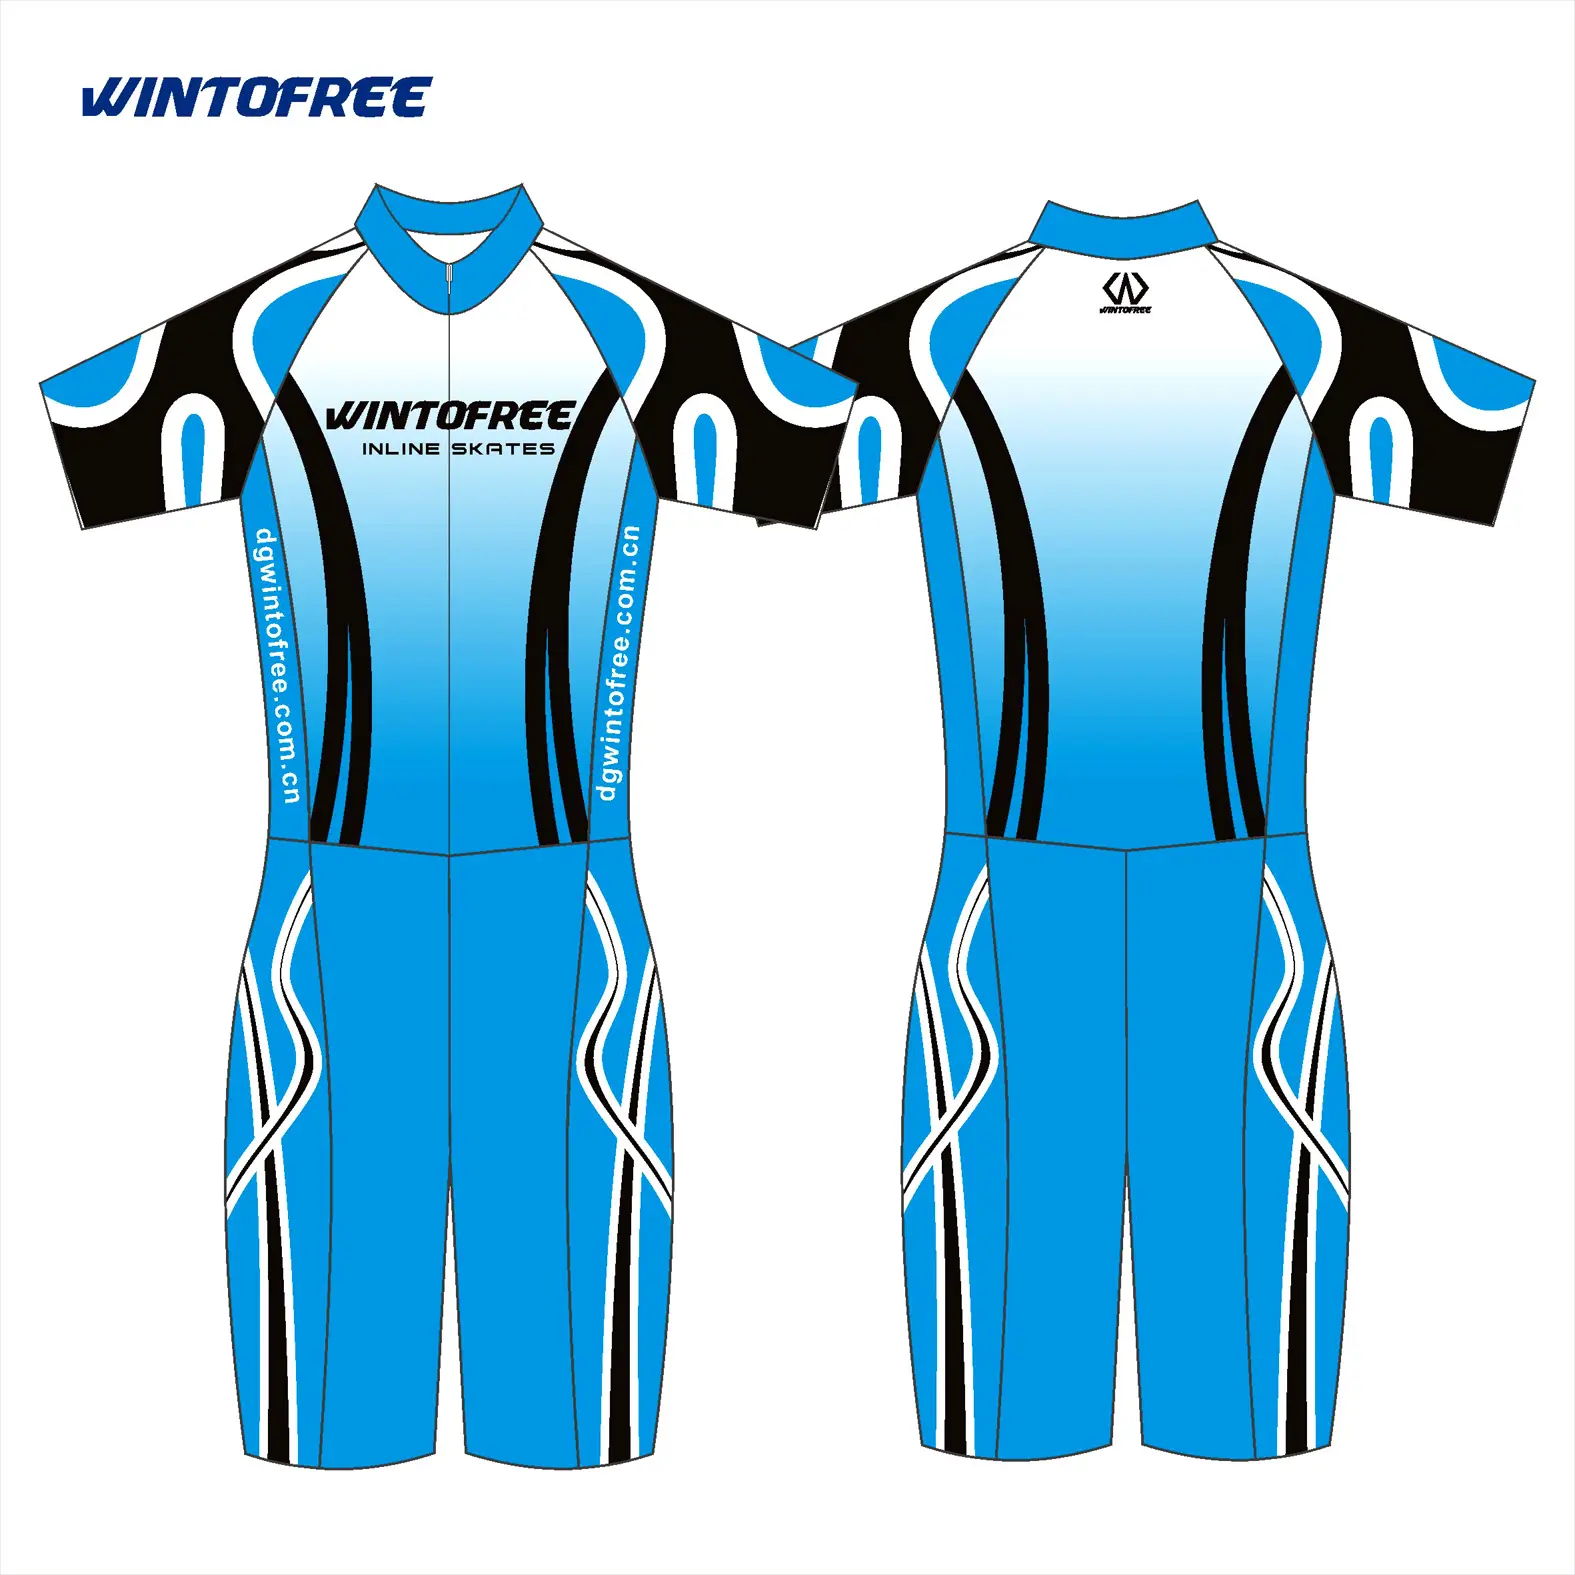 Track Speed SkinスーツCompression Inline Skating Suit